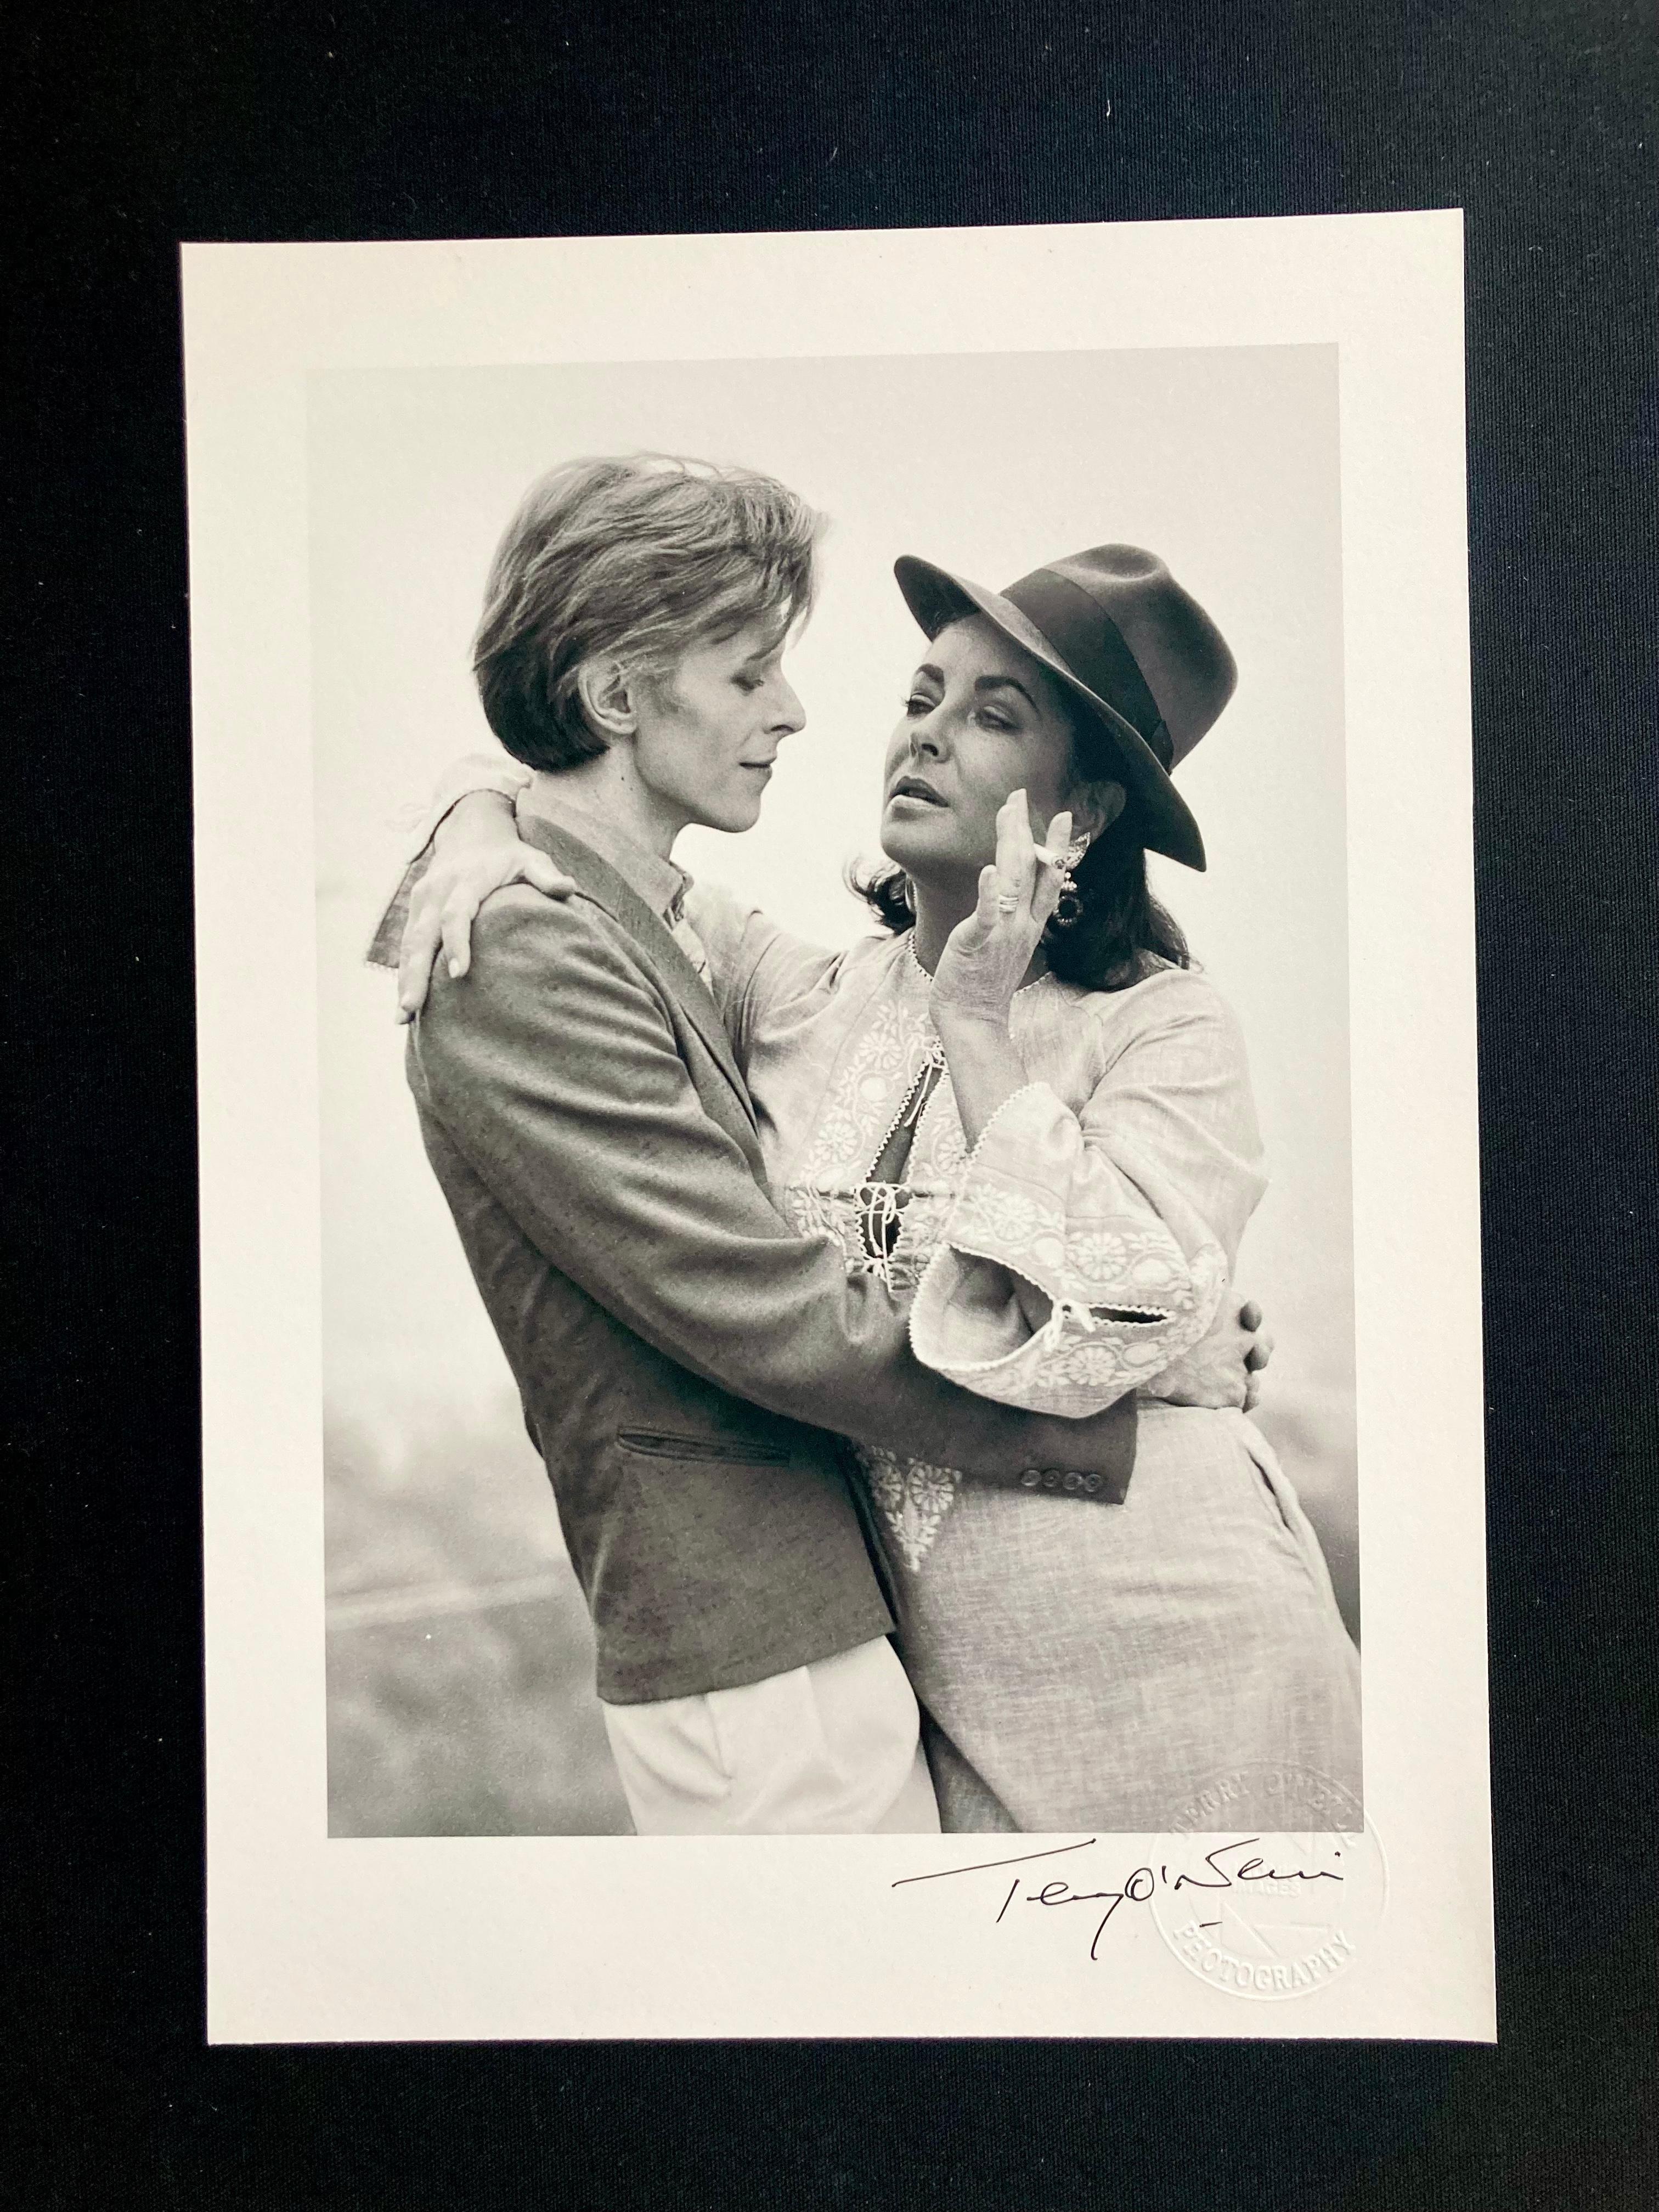 Signed open edition, 8” x 10” archival print of David Bowie and Elizabeth Taylor by Terry O'Neill, featuring Terry O’Neill’s official embossed studio stamp.

David Bowie and actress Elizabeth Taylor meet for the first time at George Cukor’s house in